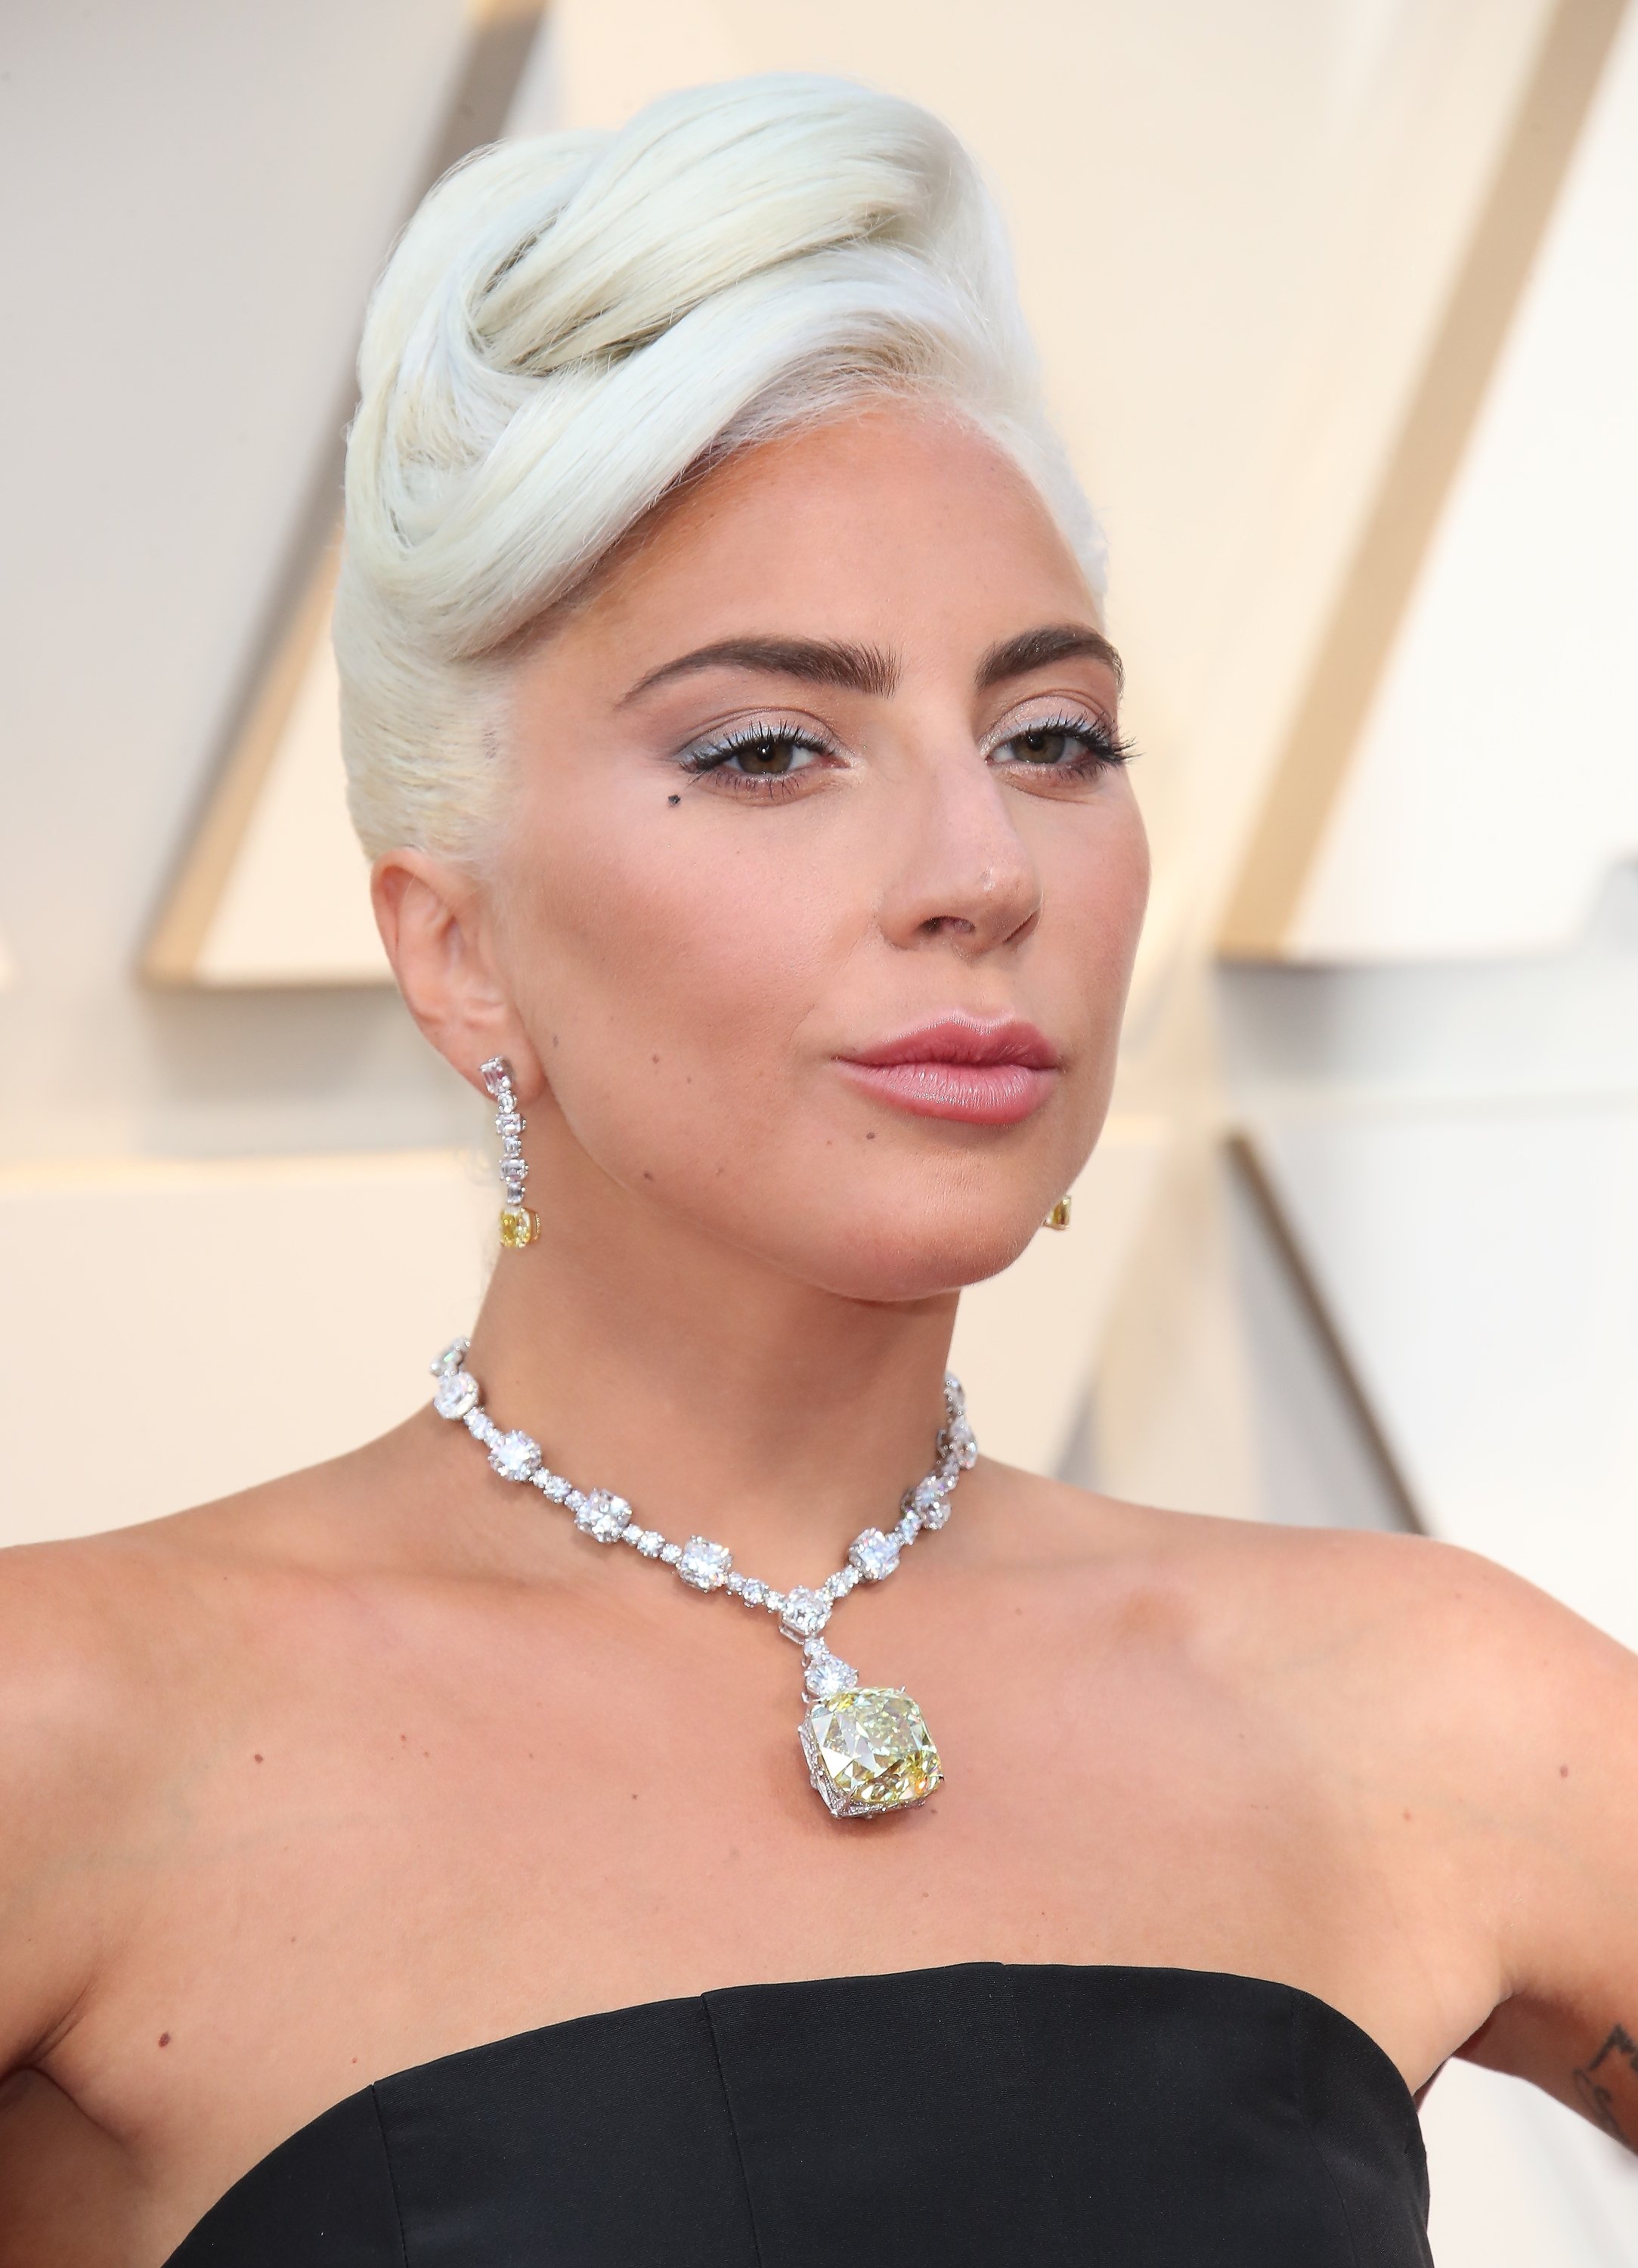 Lady Gaga at the 91st Annual Academy Awards in February 2019. | Photo: Getty Images